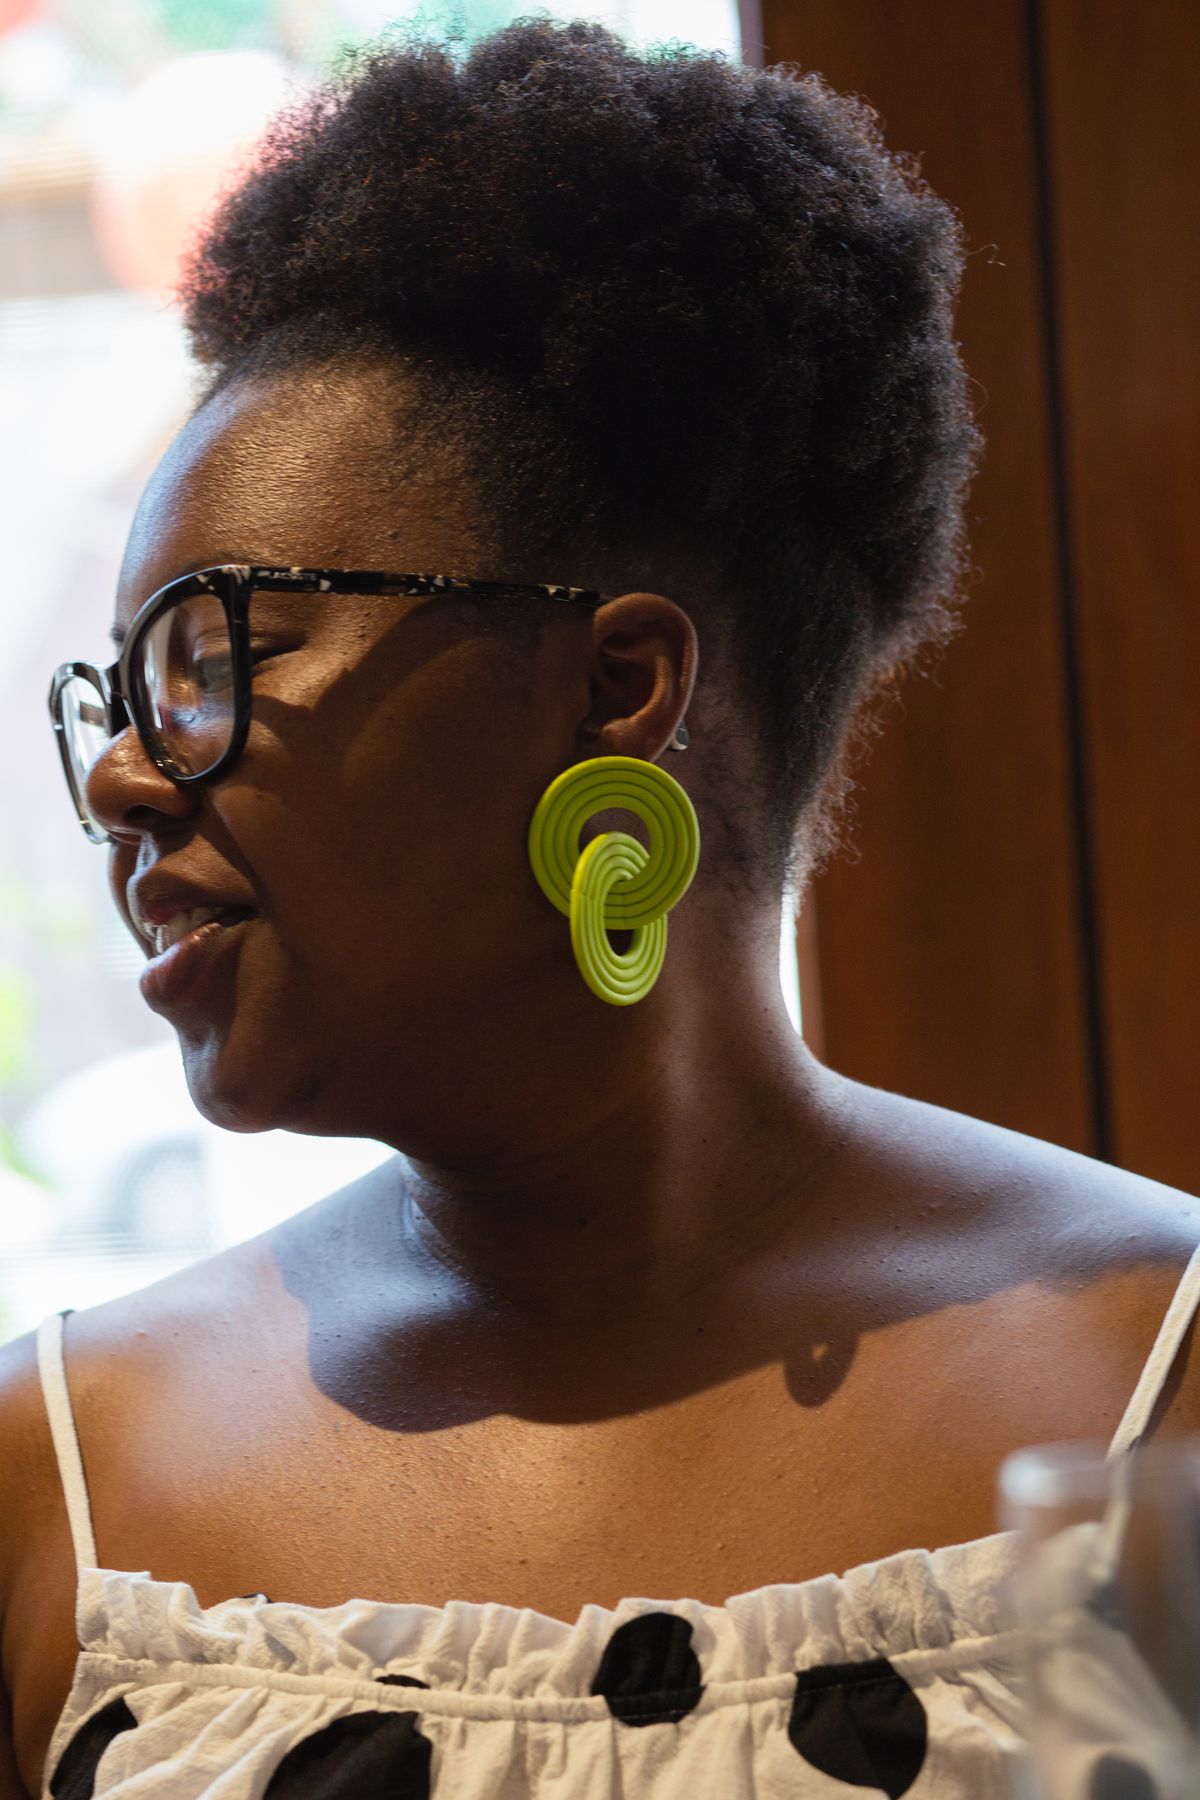 A woman in profile wearing glasses shows off her green earrings.